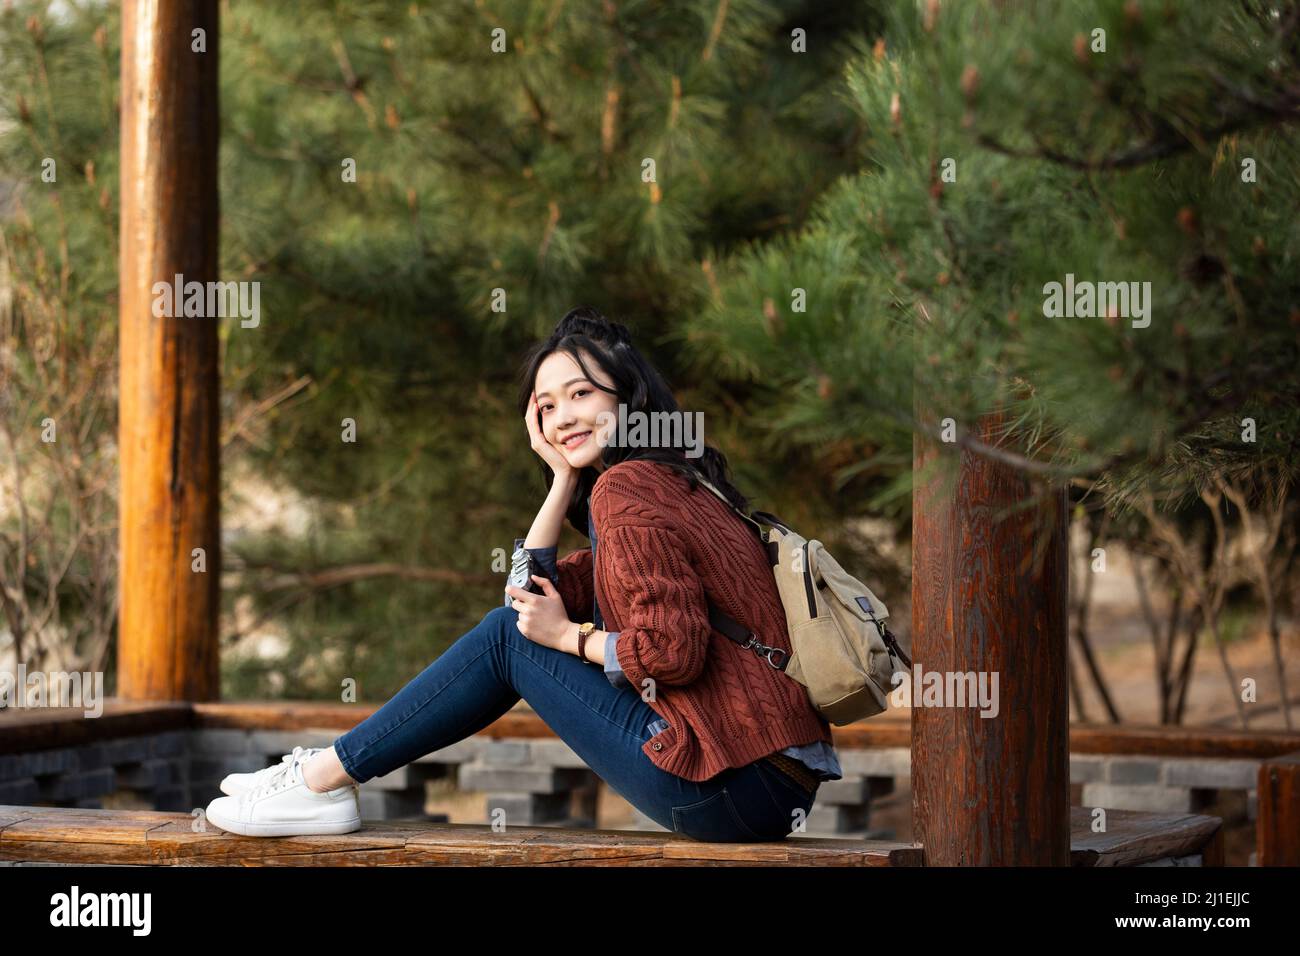 Female tourist resting in a park - stock photo Stock Photo